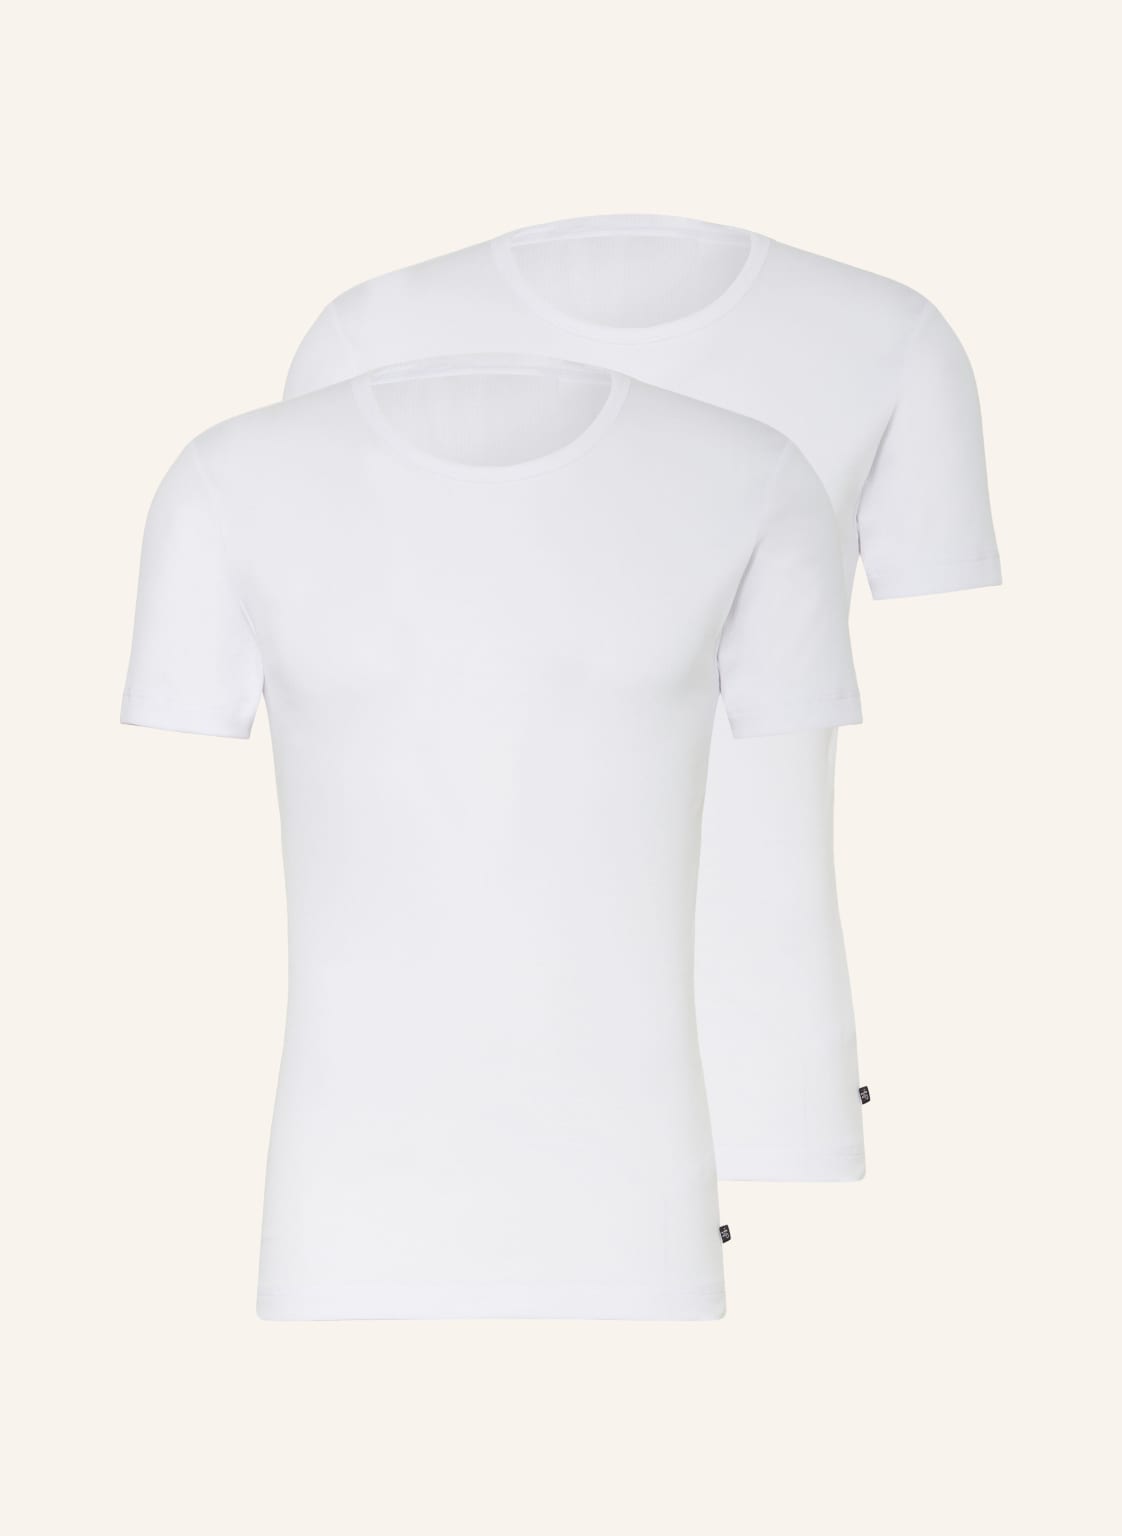 Marc O'polo 2er-Pack T-Shirts weiss von Marc O'Polo